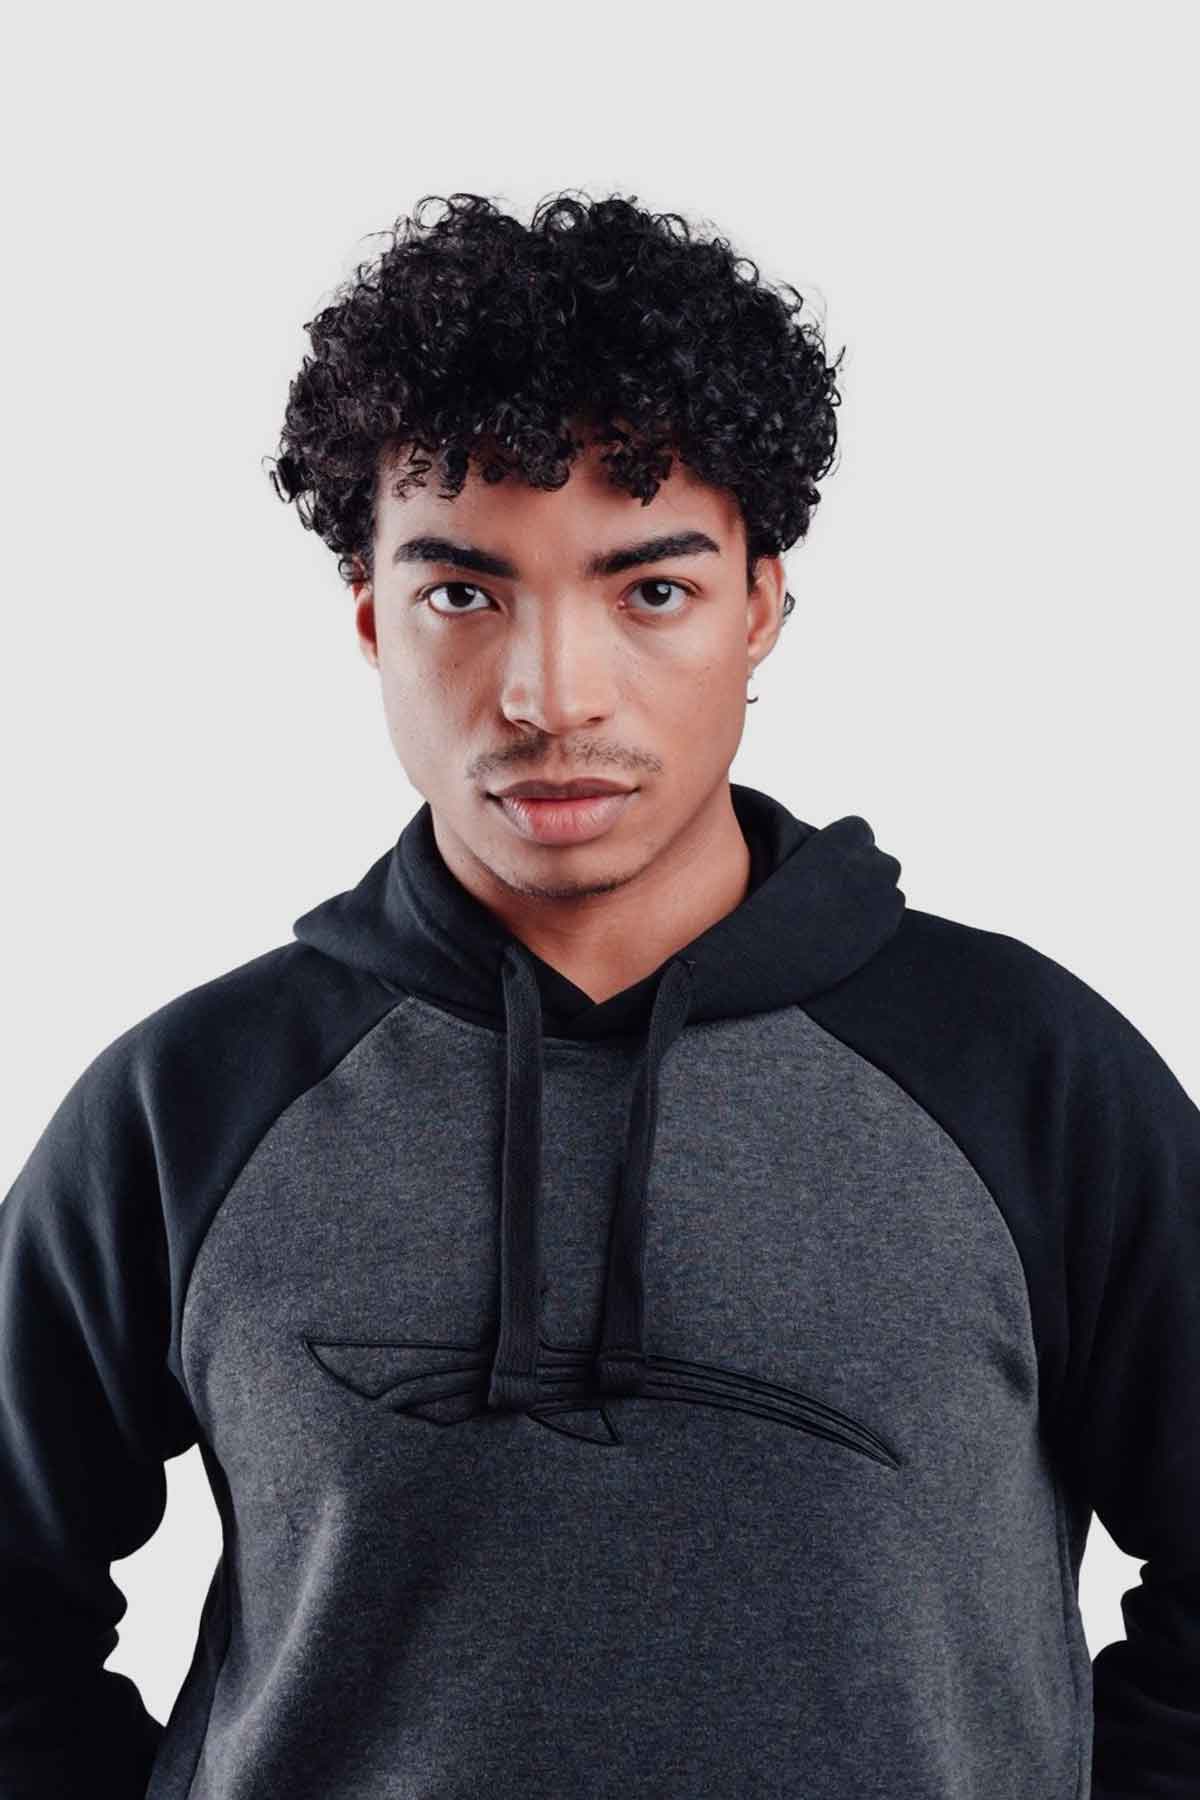 model wearing a bali edition hoodie from oceanman color black and grey